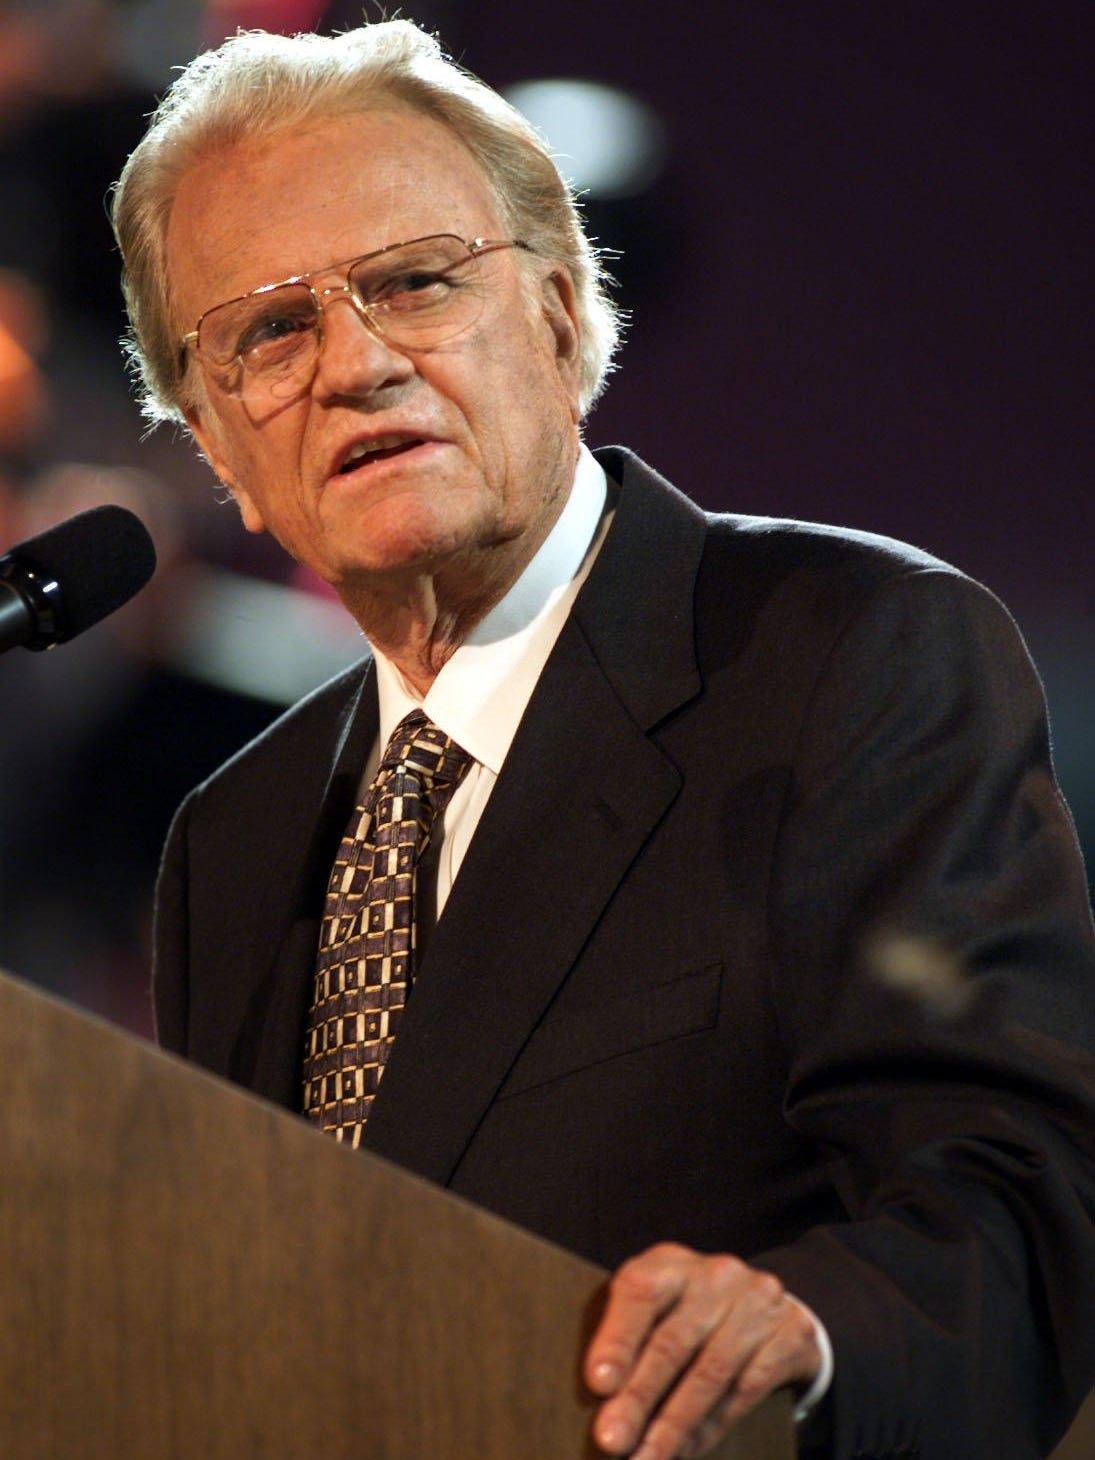 DOWNLOAD MP3: FINDING GOD'S WILL YOUR LIFE By Billy Graham (sermon) 21